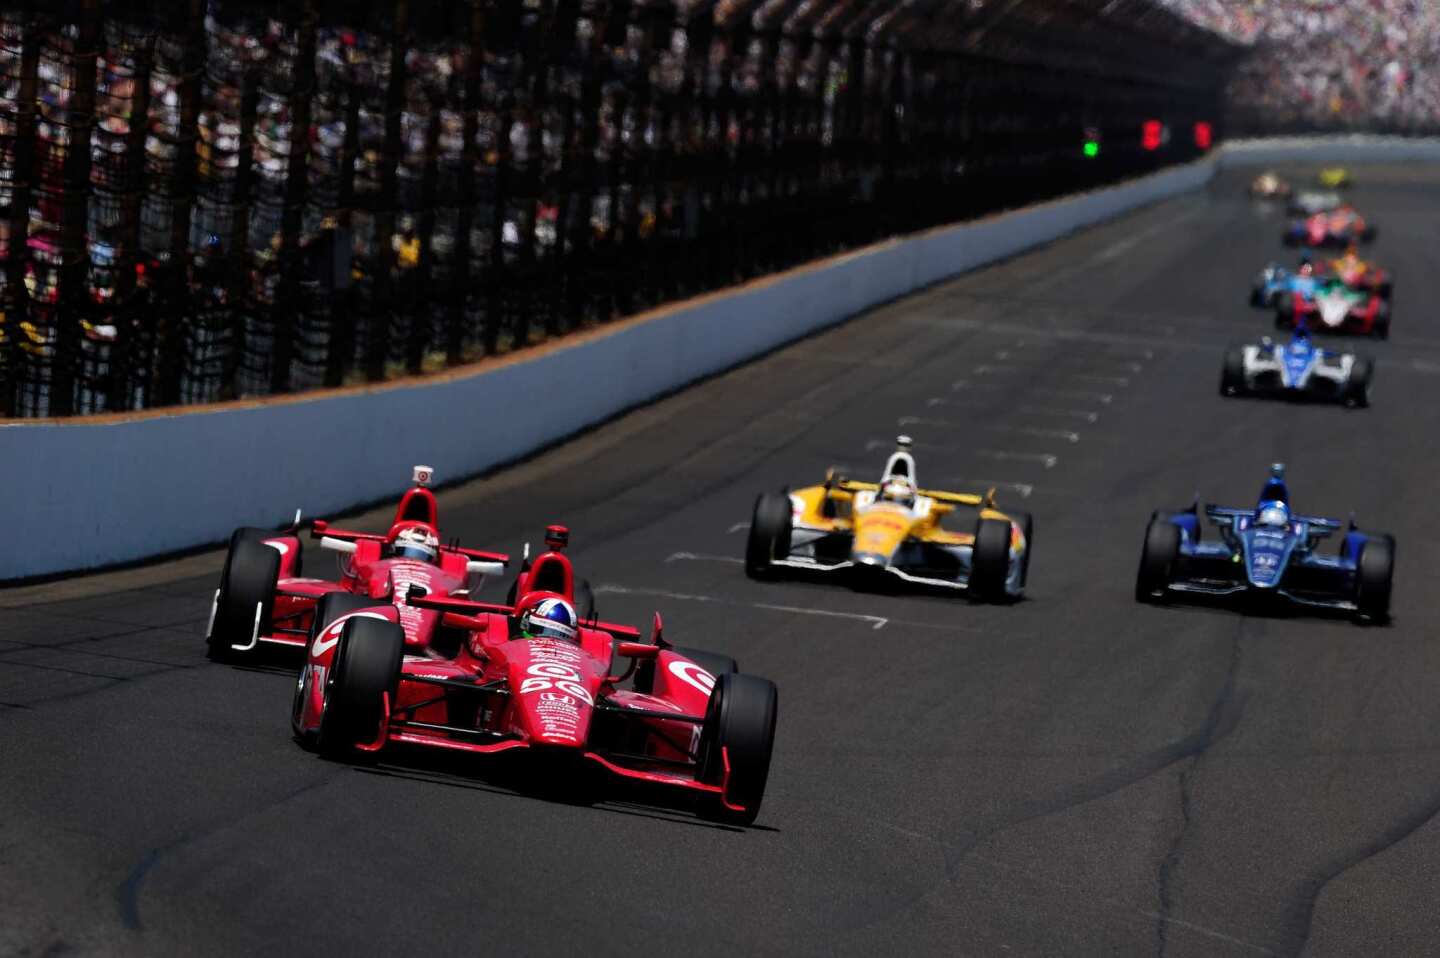 Dario Franchitti leads Target Chip Ganassi Racing Honda teammate Scott Dixon into Turn 1 during the 96th Indianapolis 500 on Sunday.